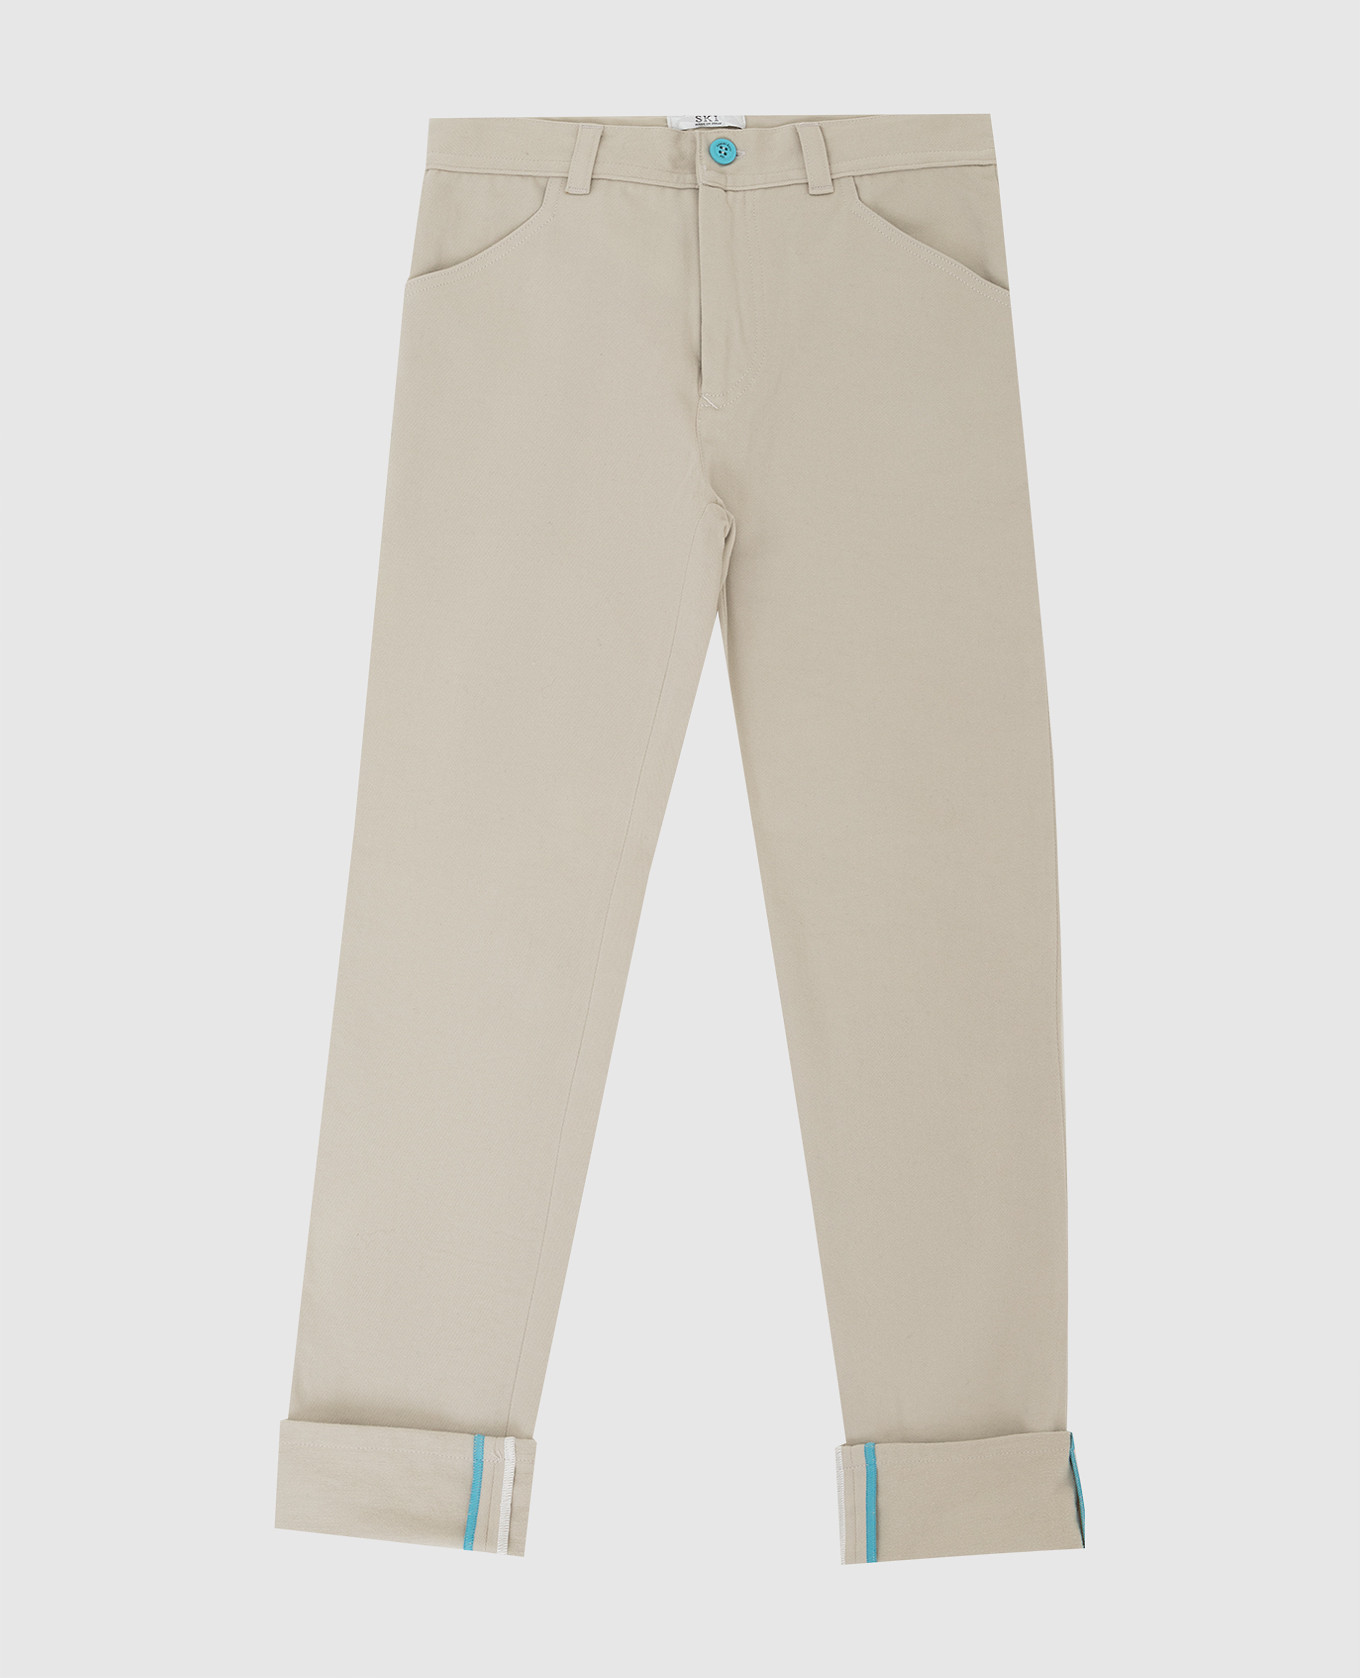 Children's light beige trousers with embroidery